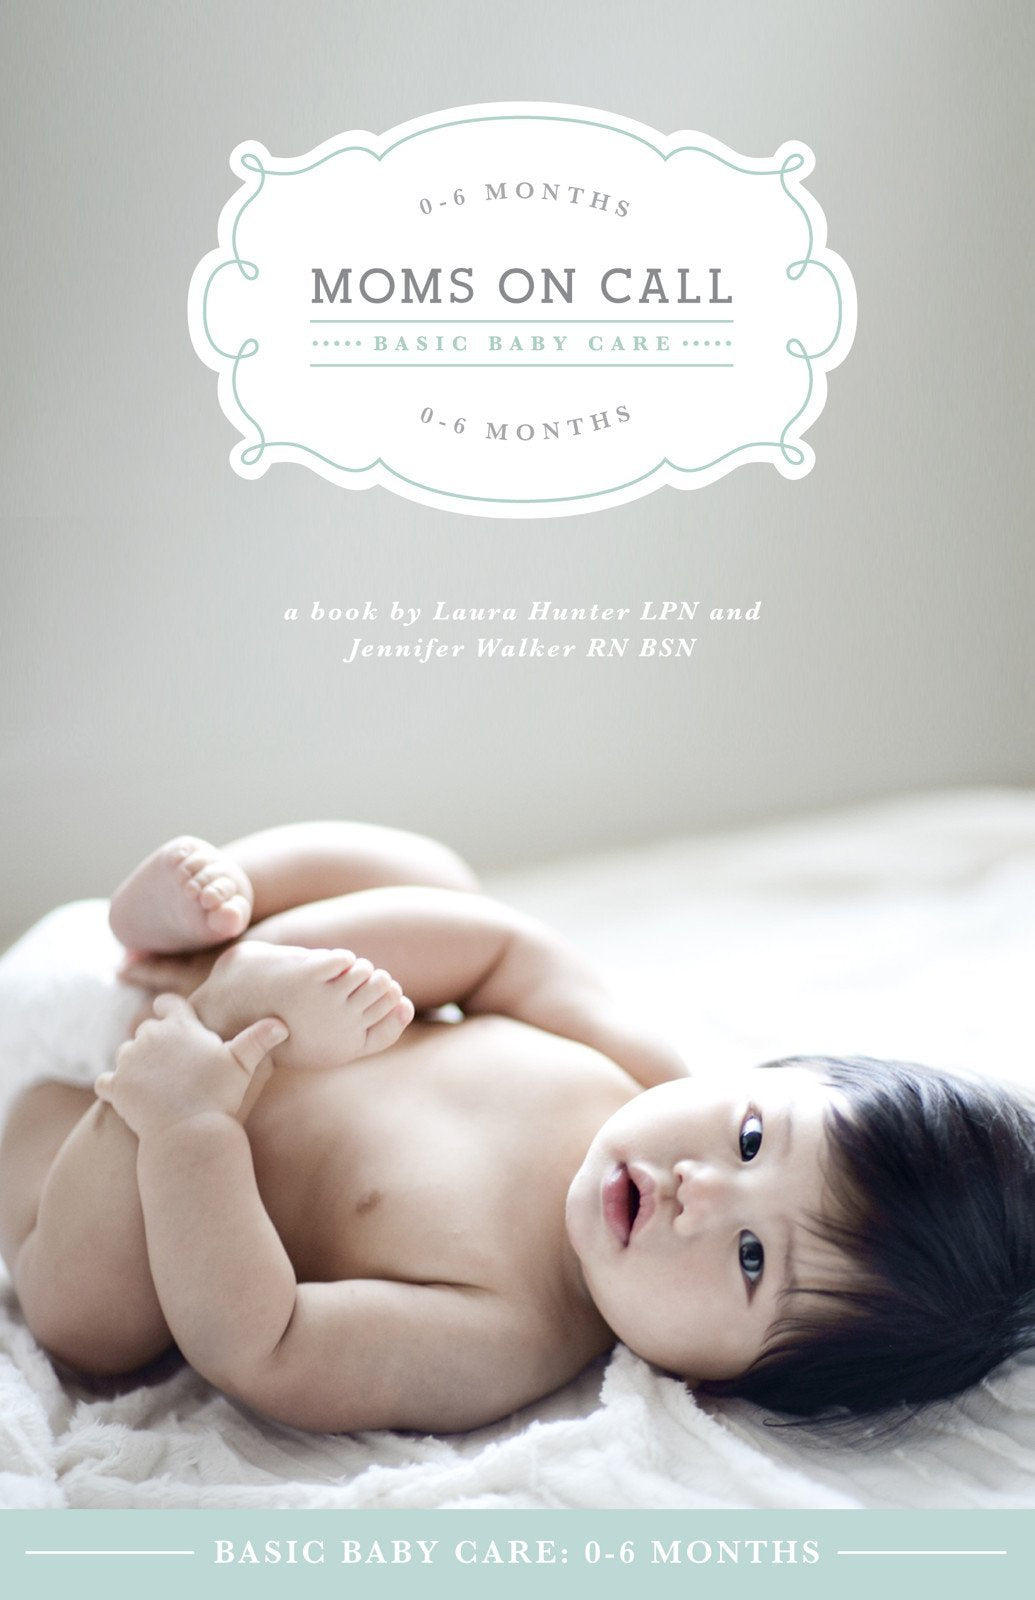 Moms on Call 0 - 6 months